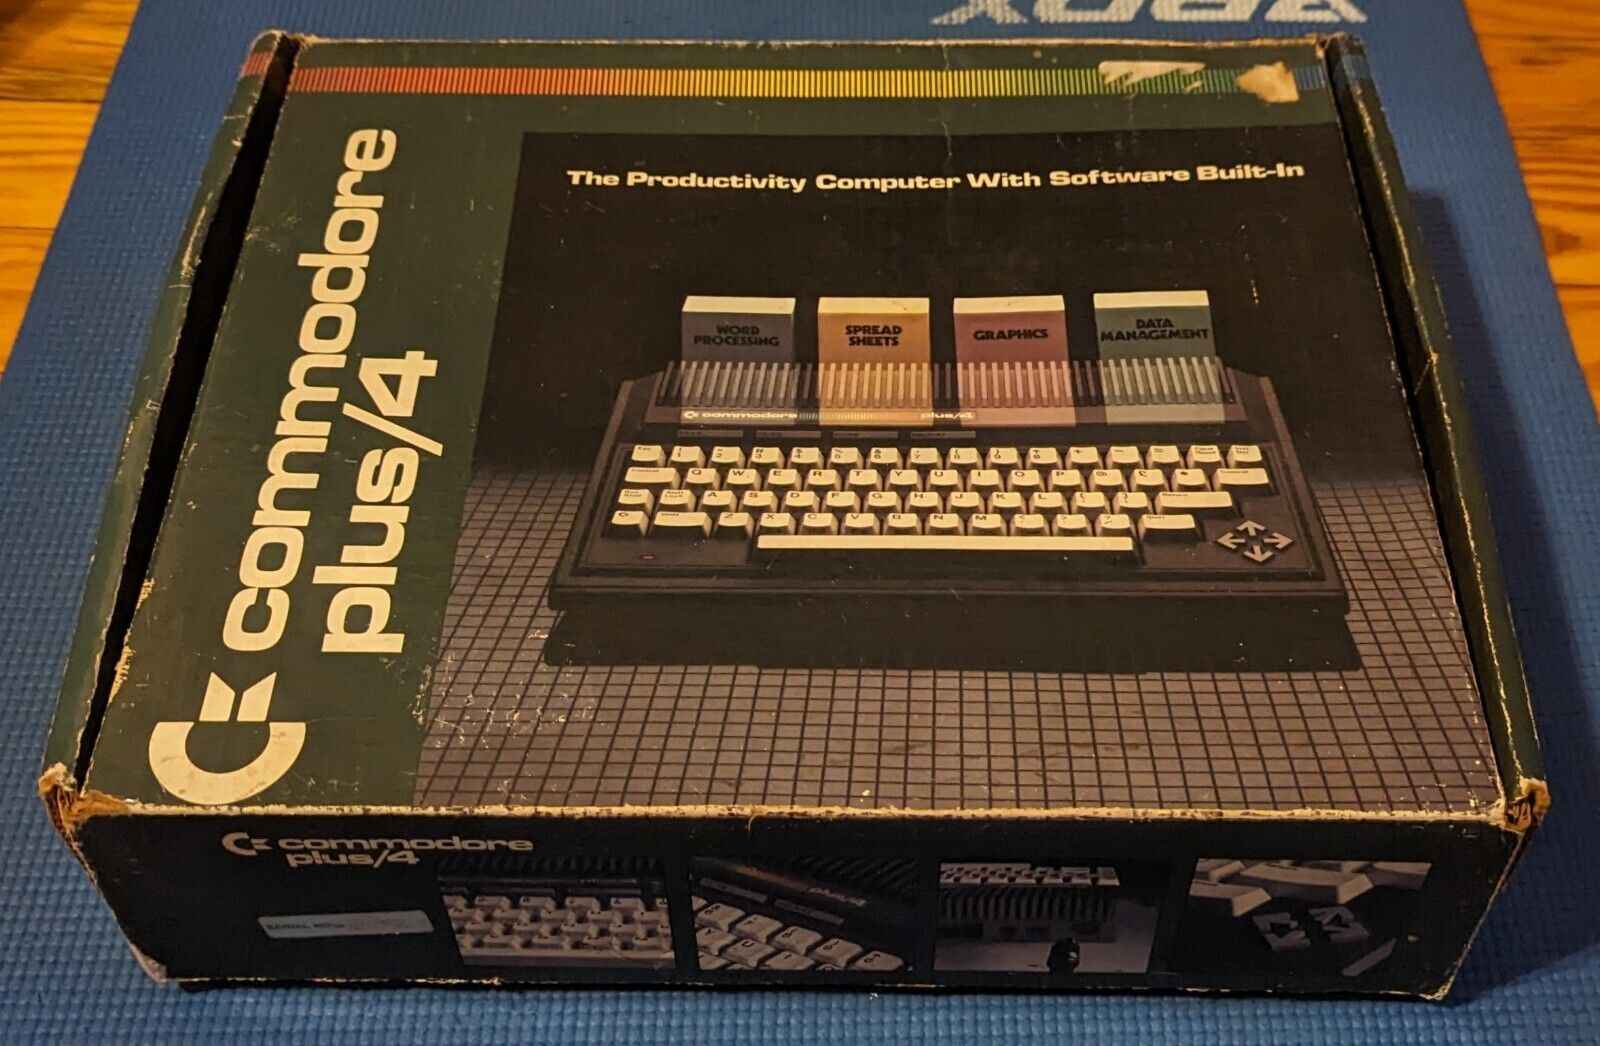 Vintage Boxed Commodore Plus/4 Computer & Cords, No Manual, Powers On, Clean